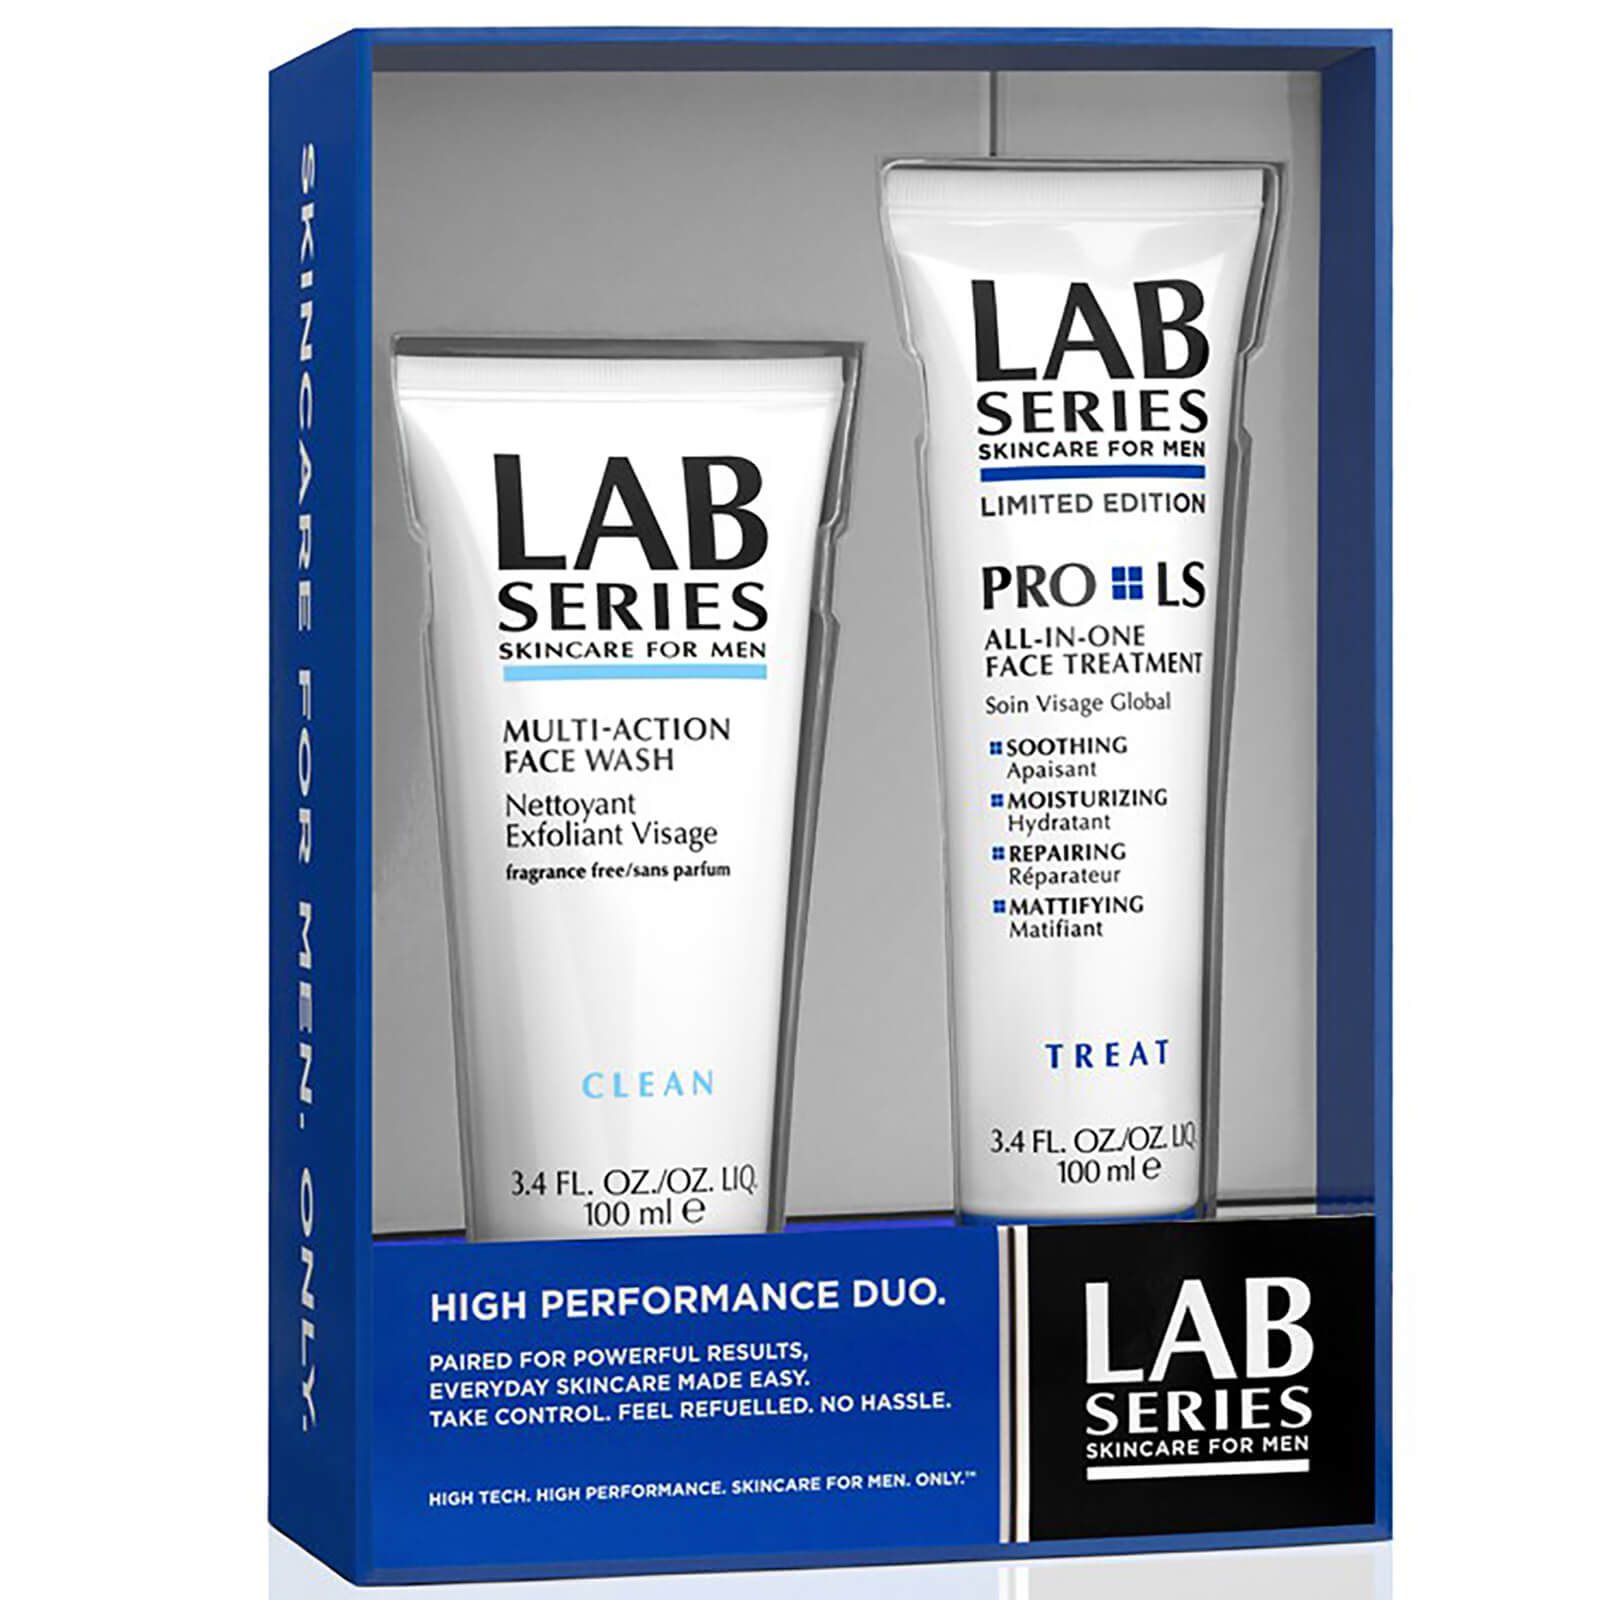 Lab Series Skincare for Men High Performance Duo Set